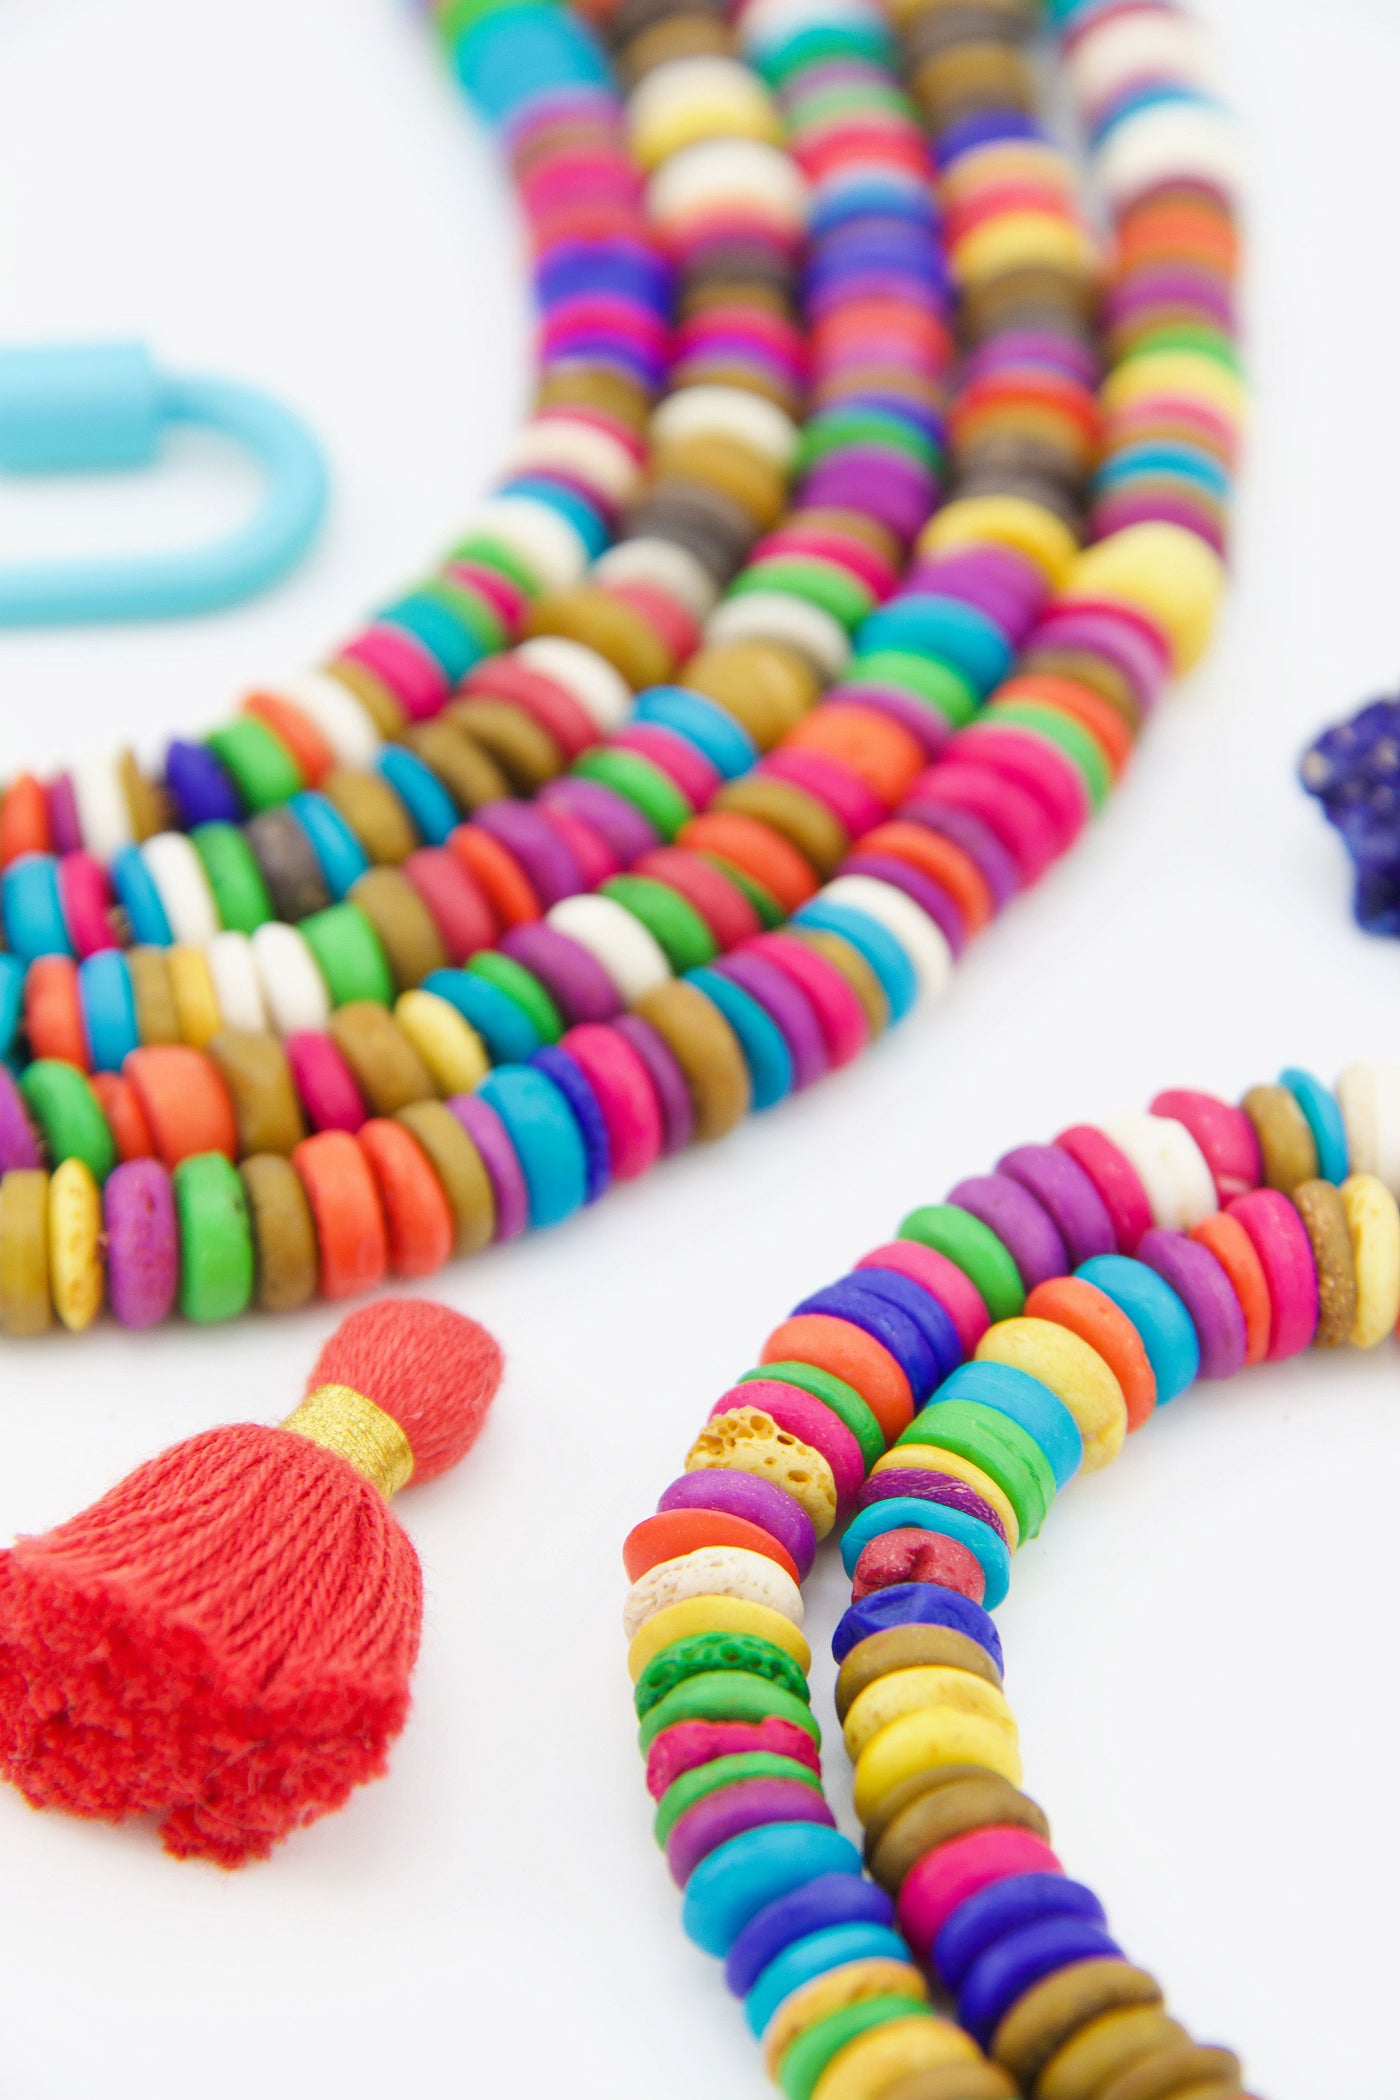 8-9mm Multi Color Natural Spacer Beads: Bright Heishi Discs for making friendship bracelets